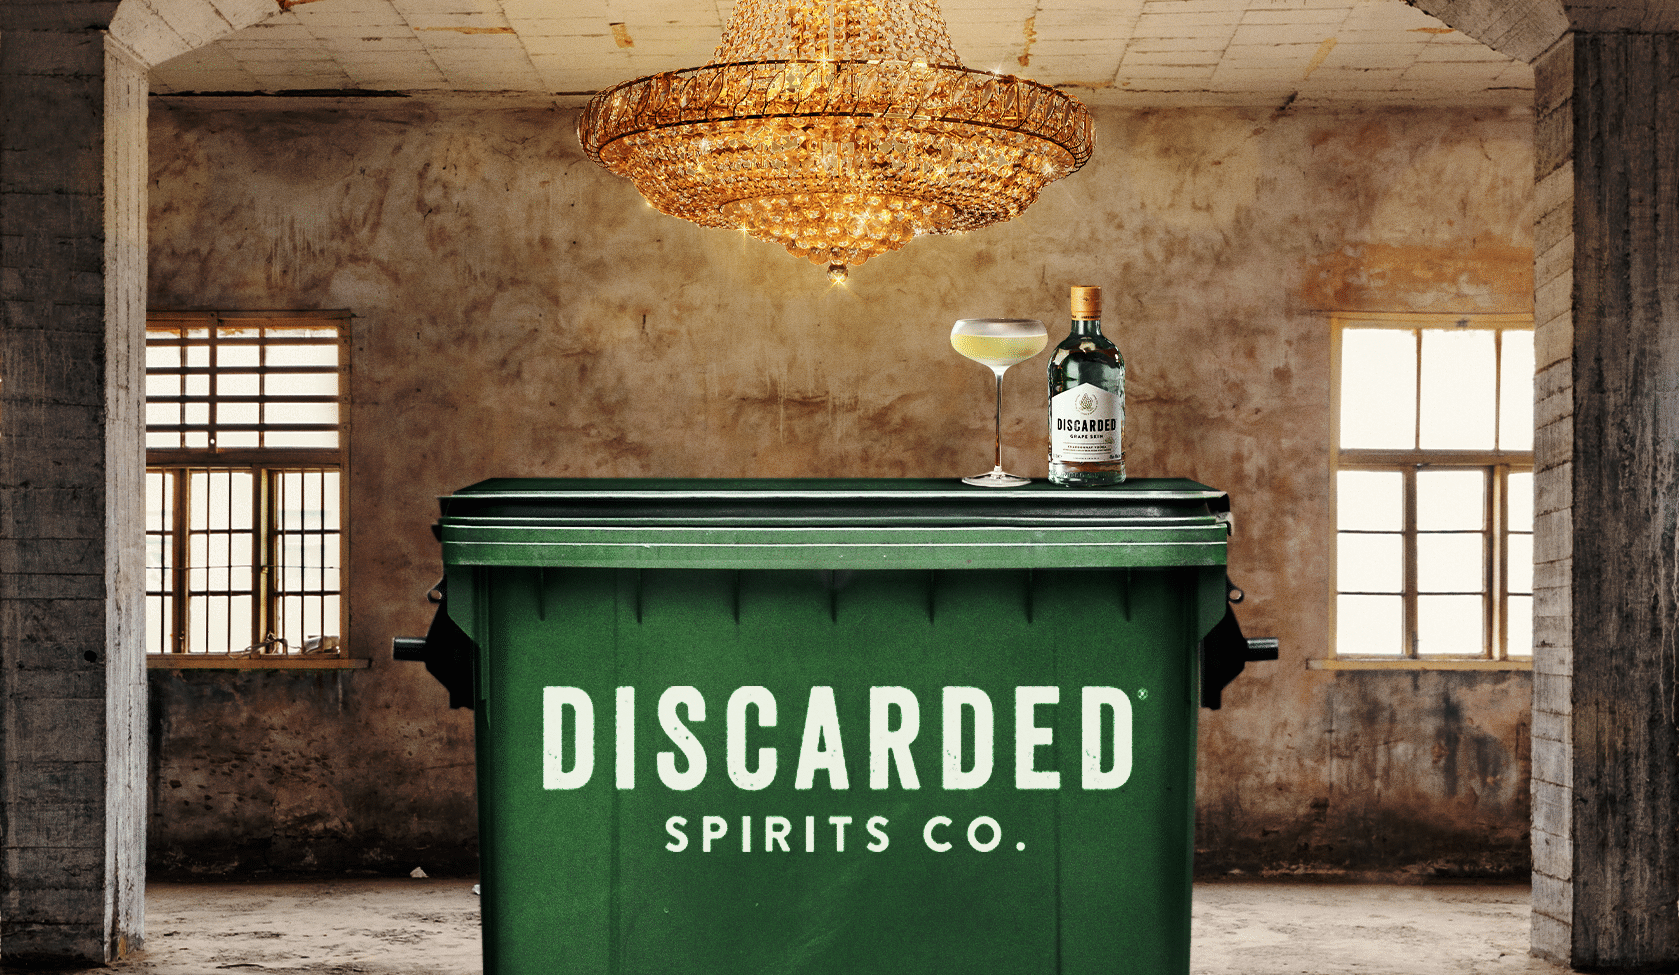 A bar made out of a green bin with the Discarded Spirits Co, part of London Cocktail Week 2021